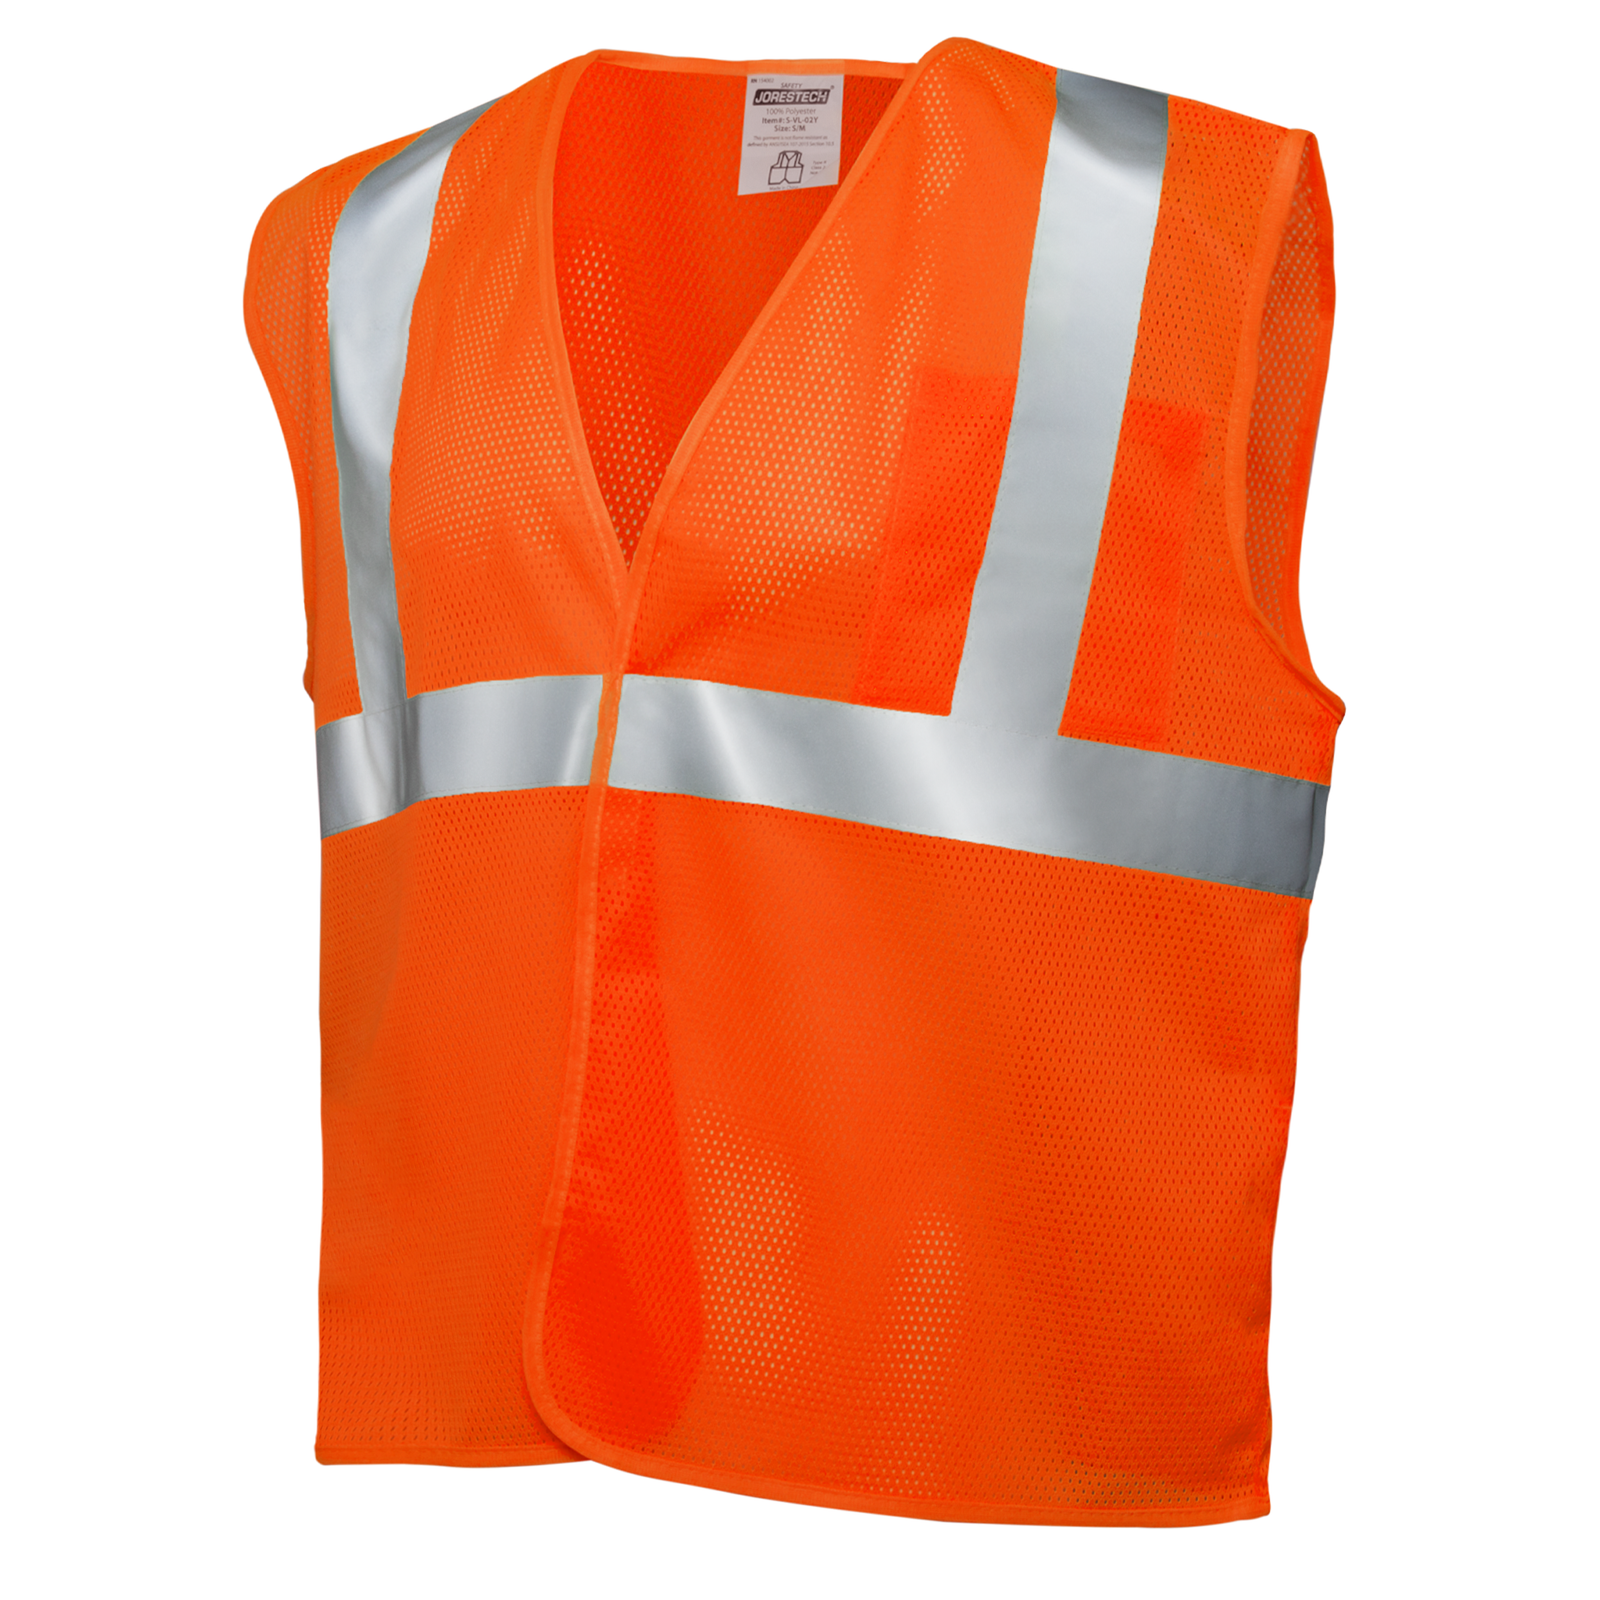 Diagonal view of the printed Hi-Vis orange ANSI safety vest with 2 inches reflective strip and pocket